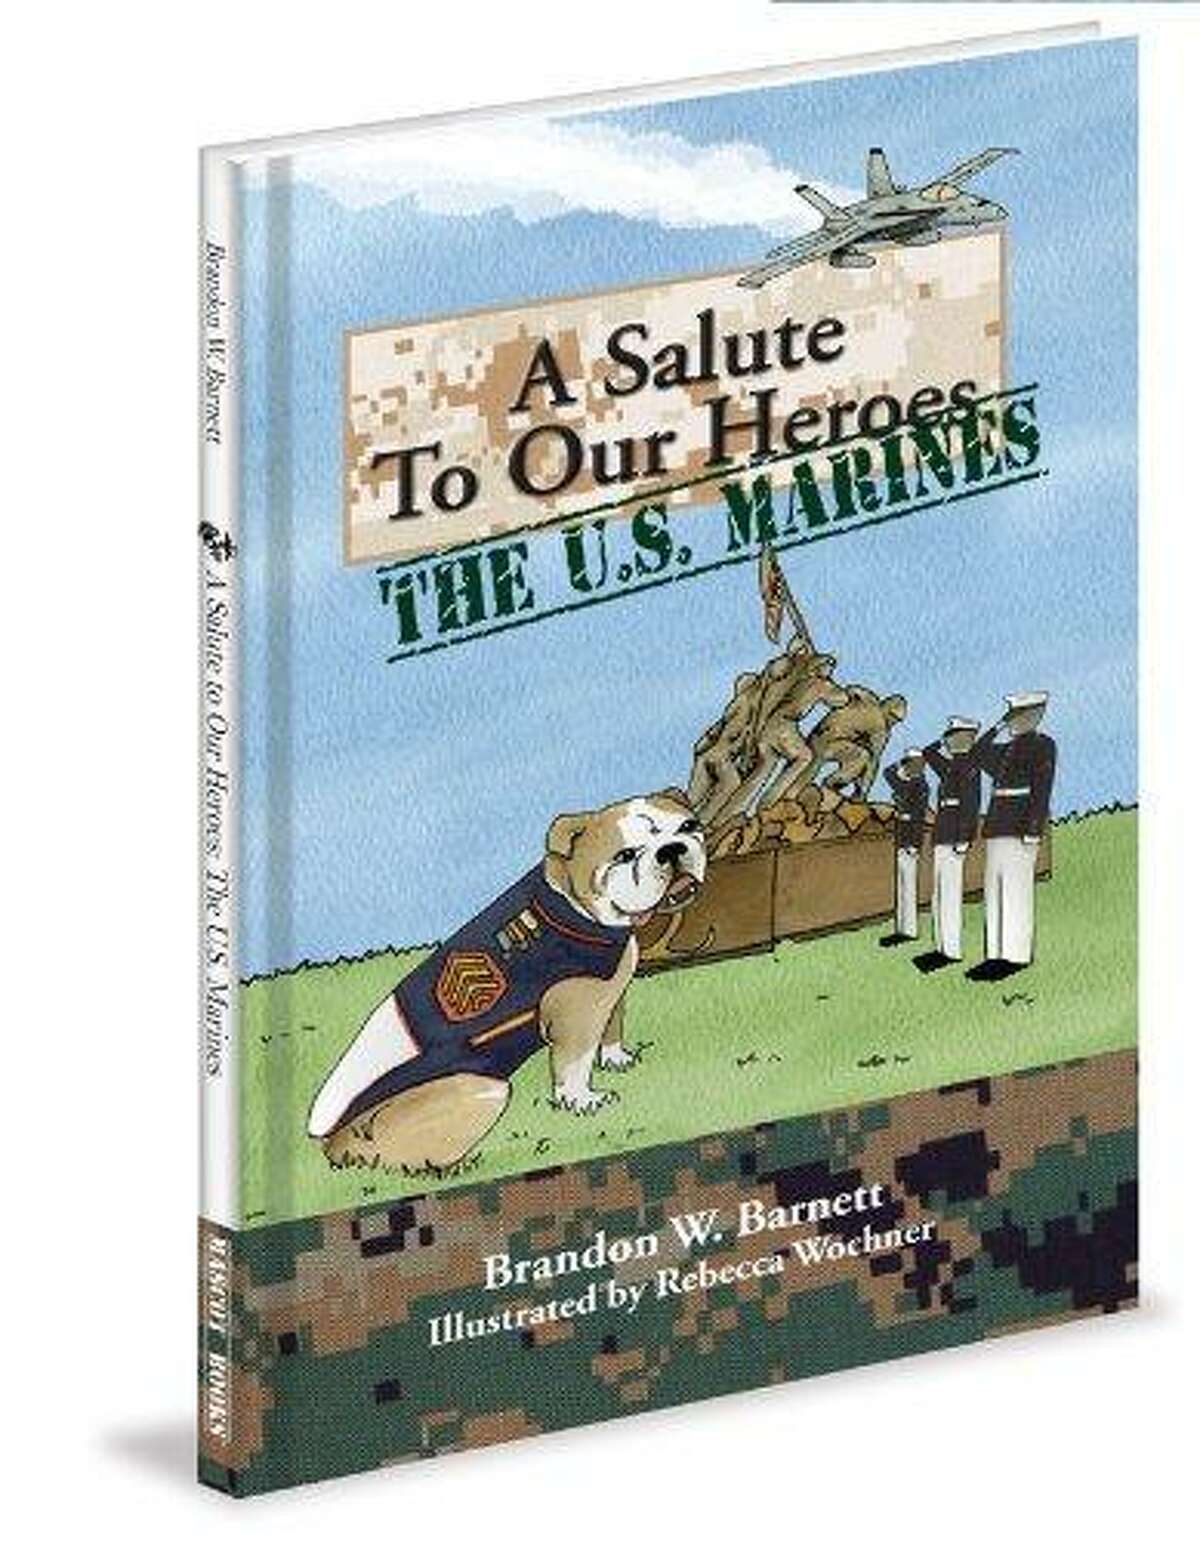 “A SALUTE TO OUR HEROES: THE U.S. MARINES,” by Brandon W. Barnett. Illustrated by Rebecca Wochner. Published by Mascot Books.